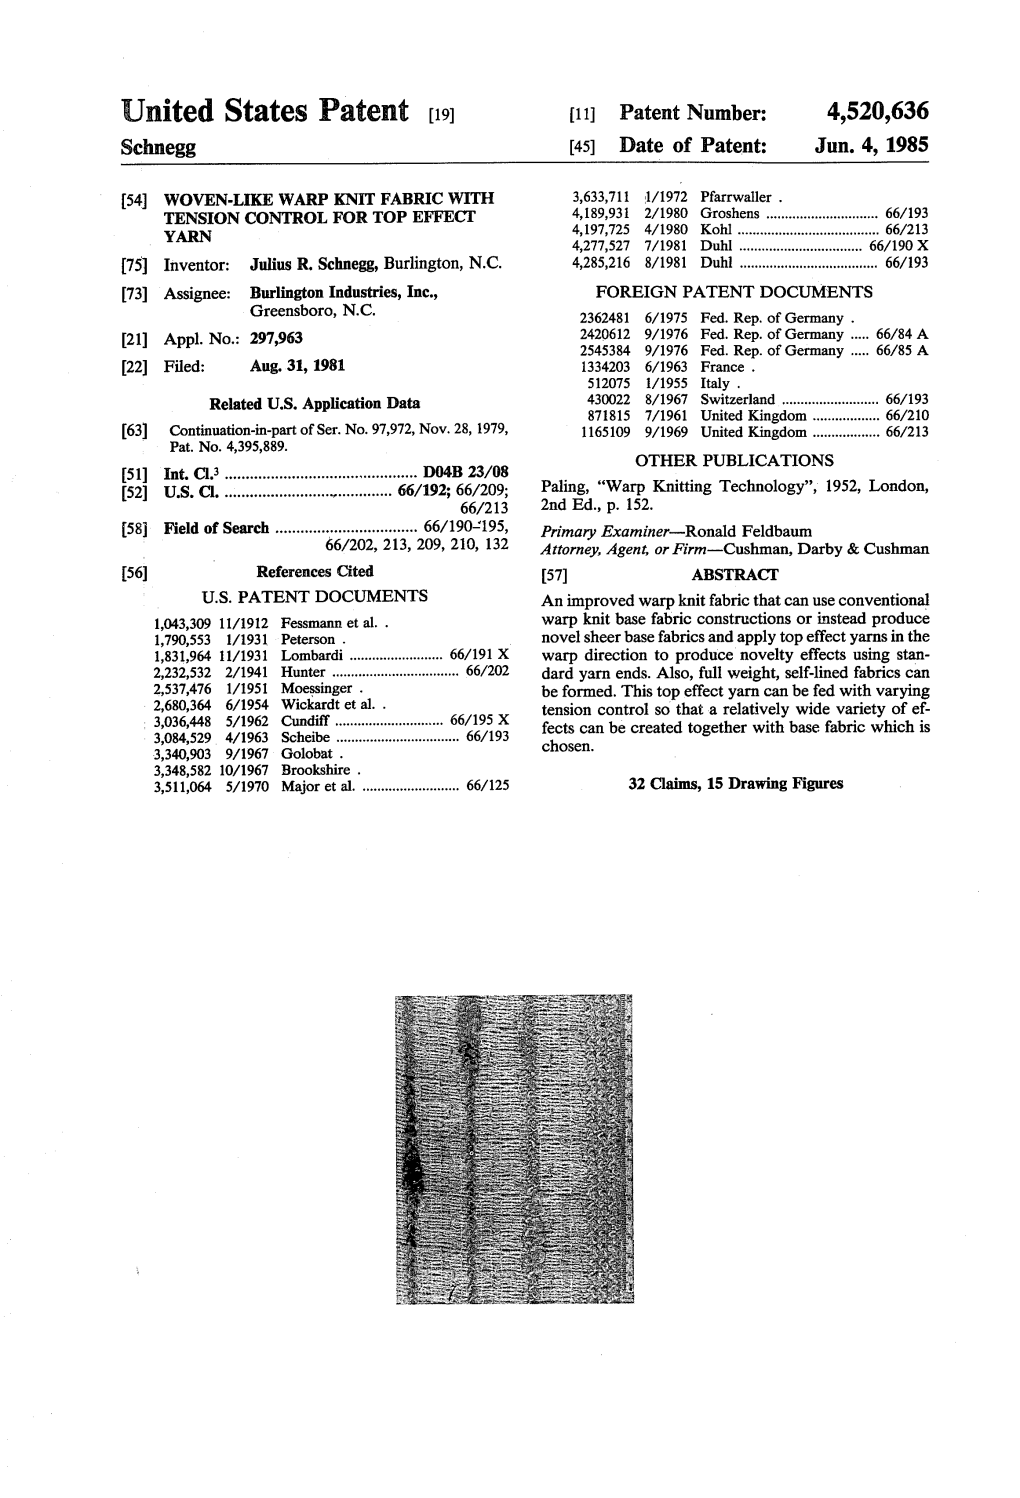 United States Patent (19) 11 Patent Number: 4,520,636 Schnegg (45) Date of Patent: Jun